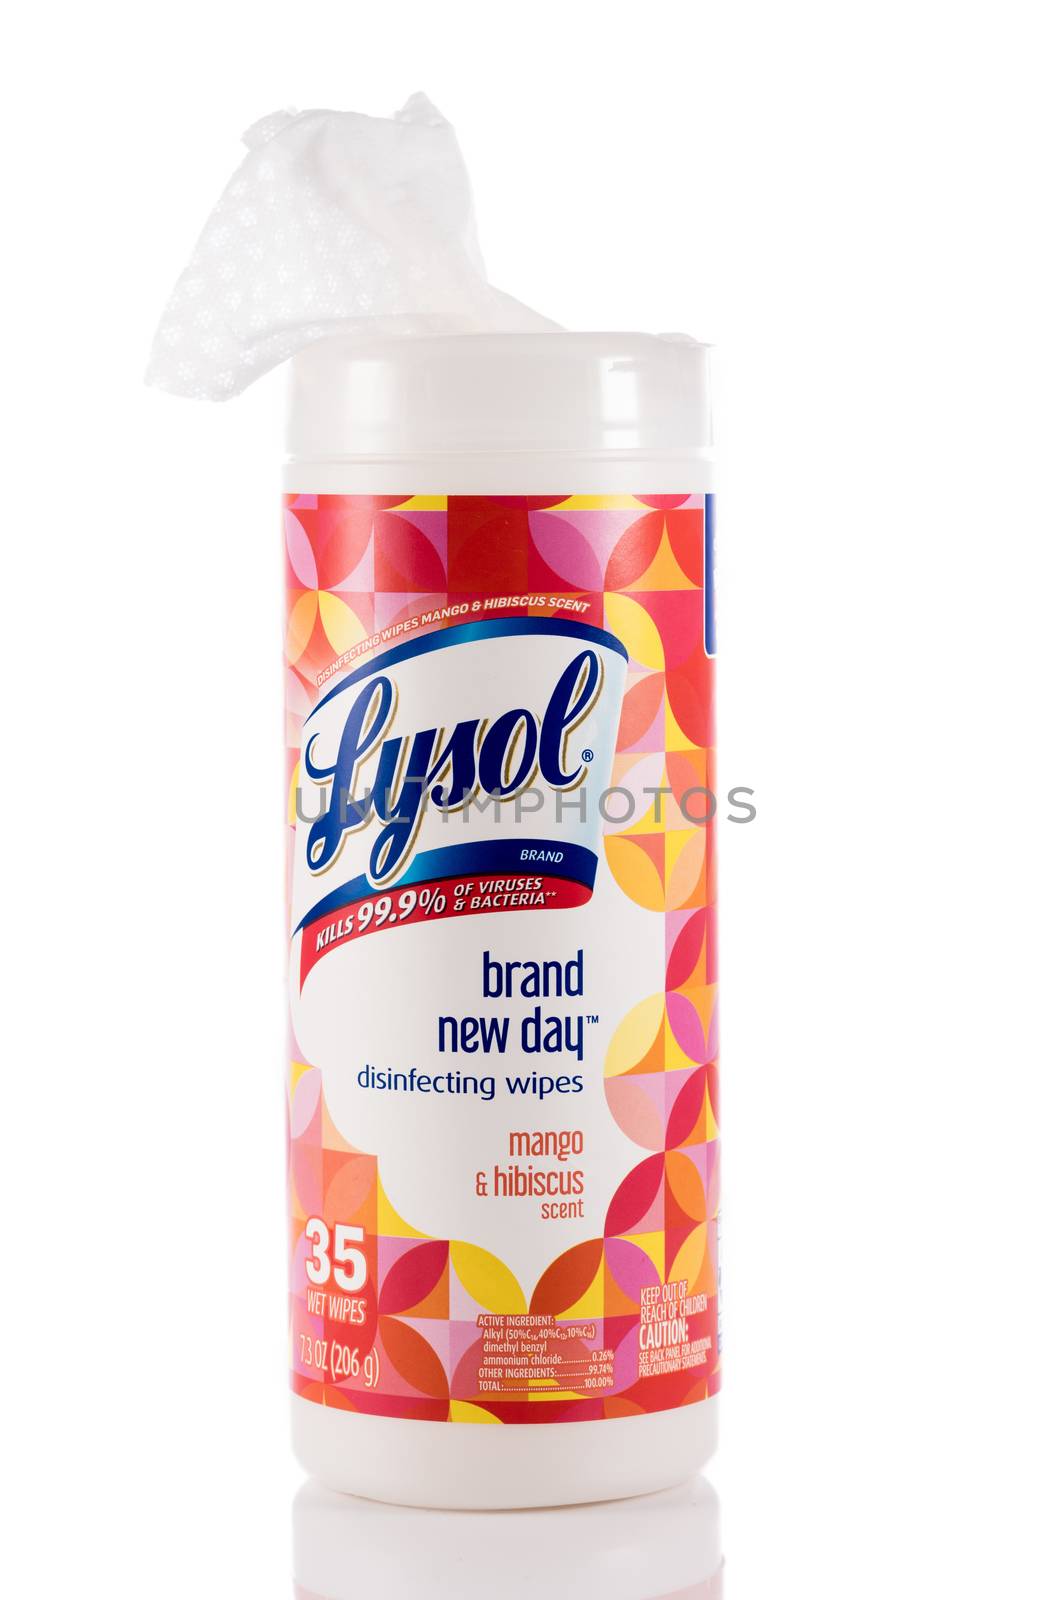 Lysol disinfecting wipes canister isolated against white background by steheap